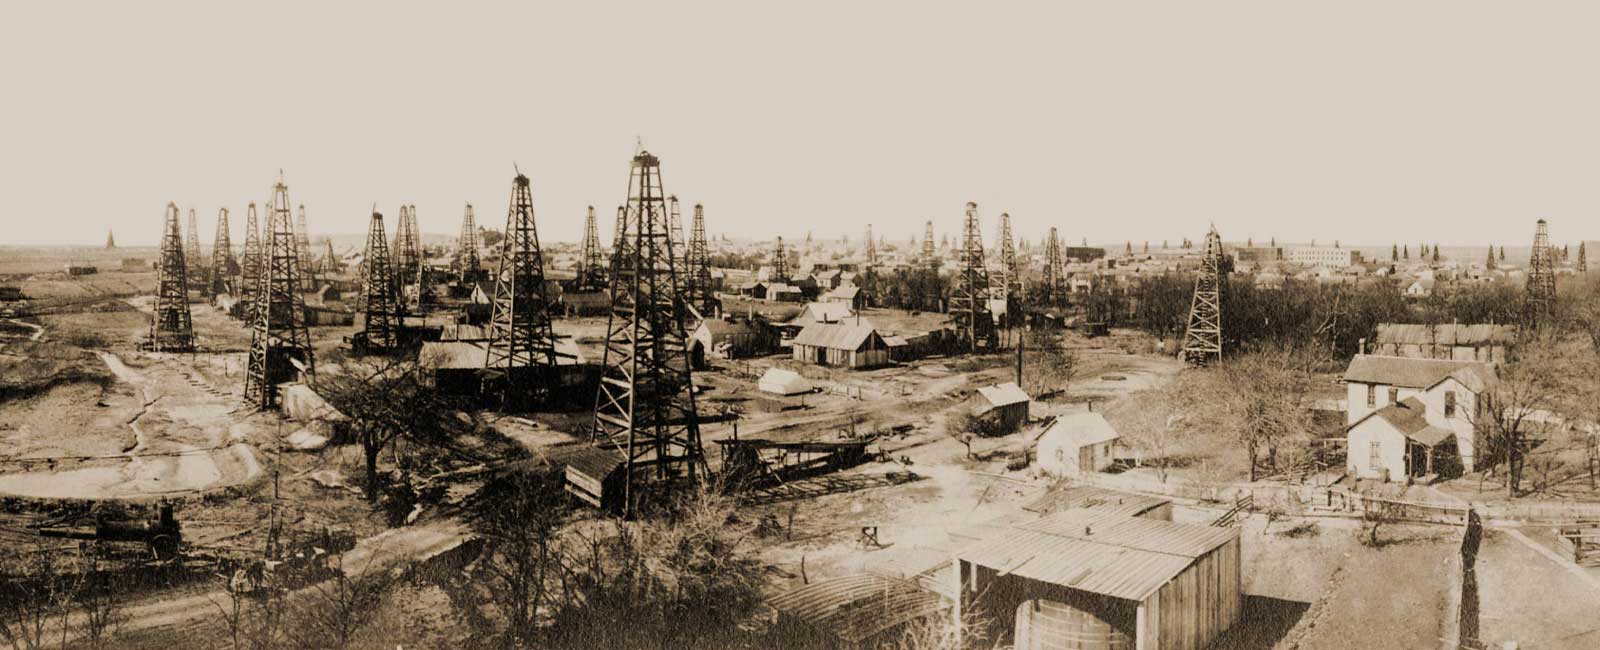 Historic Bartlesville photographed with oil wells stretching to horizon. Photo courtesy of Bartlesville Area History Museum.